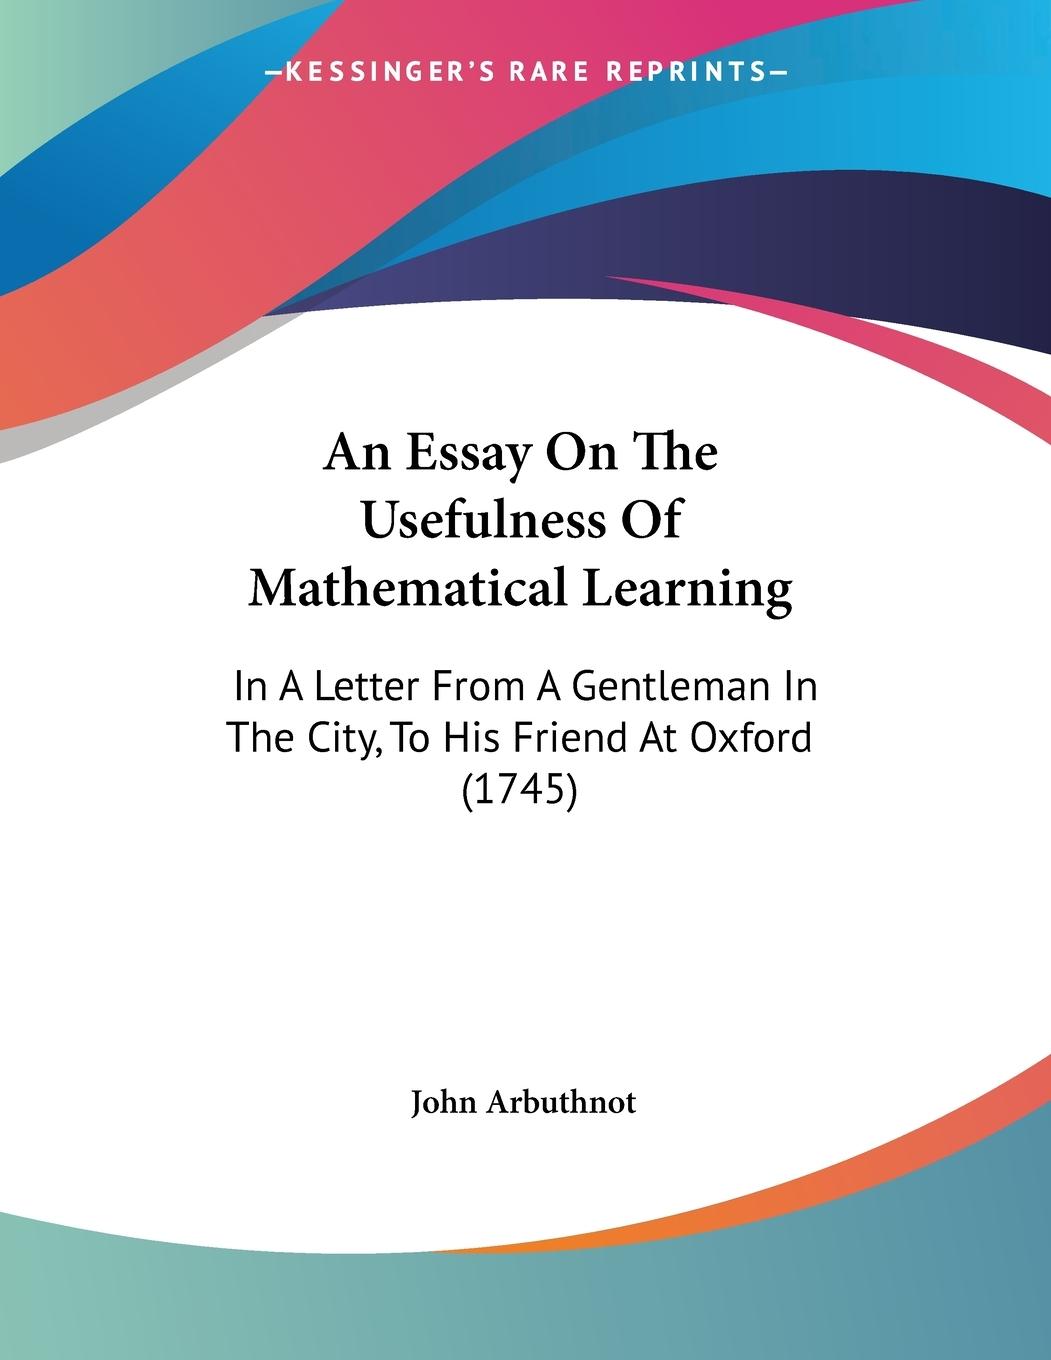 An Essay On The Usefulness Of Mathematical Learning - Arbuthnot, John